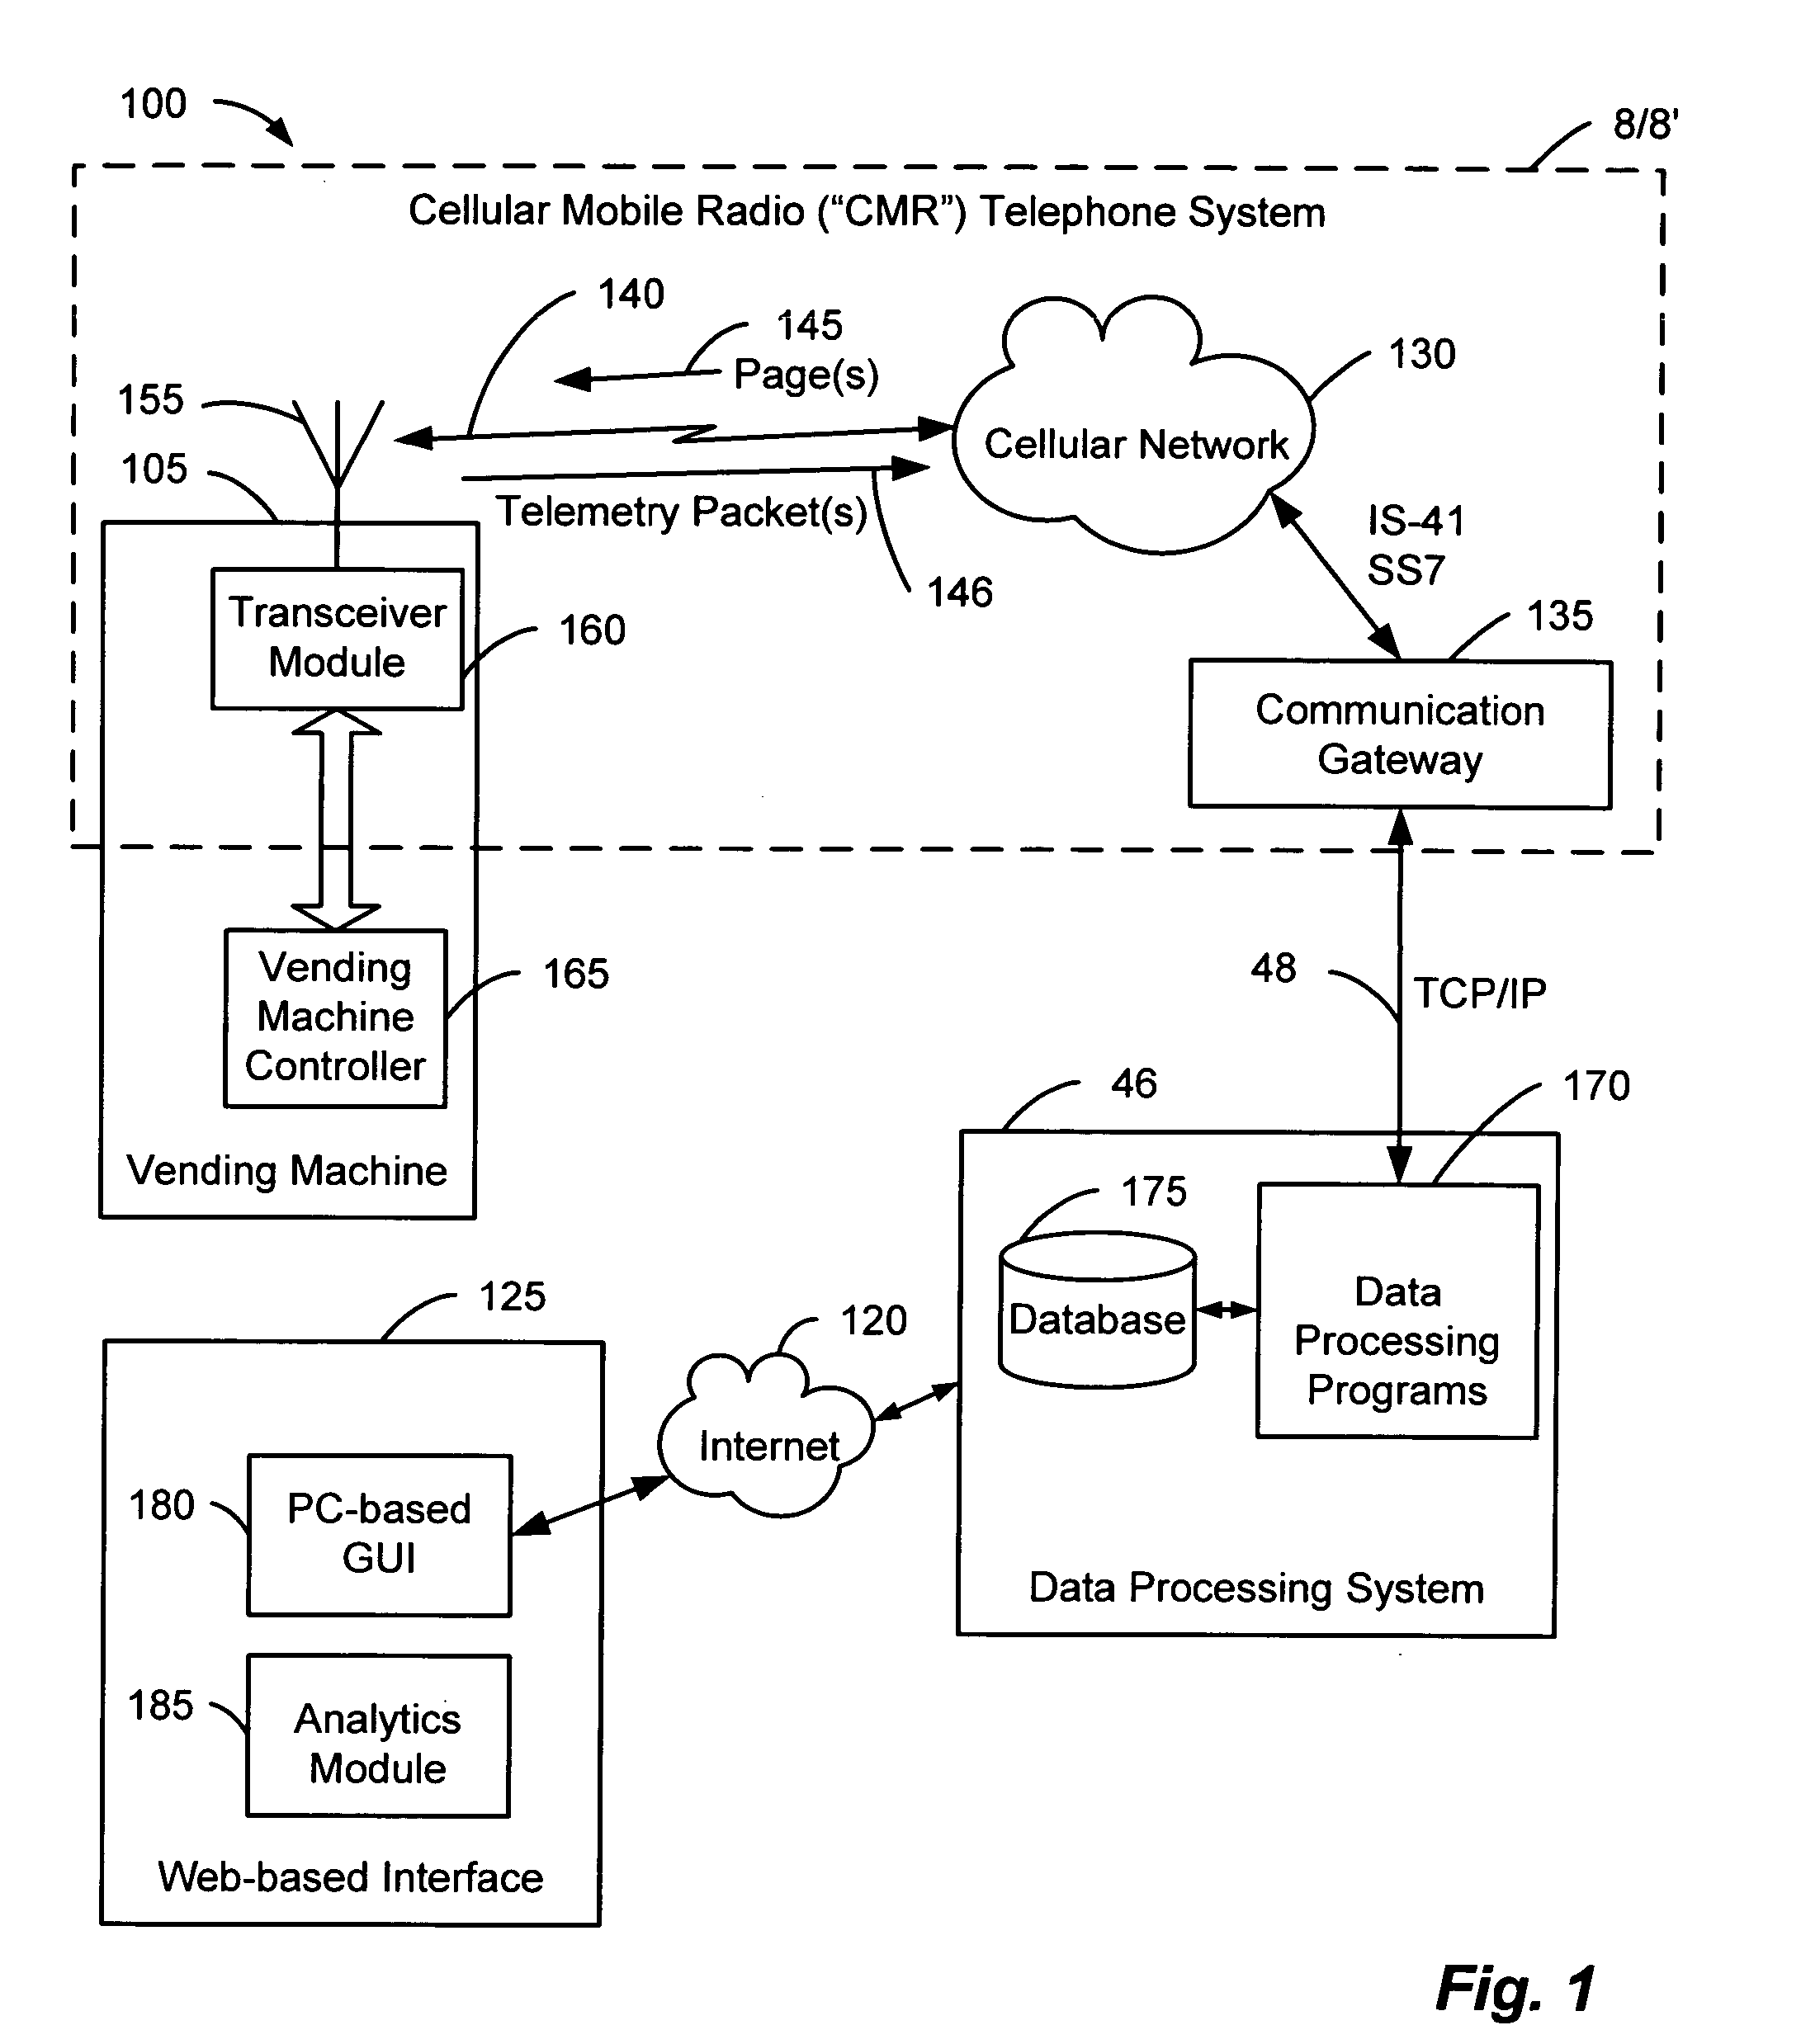 Method and system for refining vending operations based on wireless data